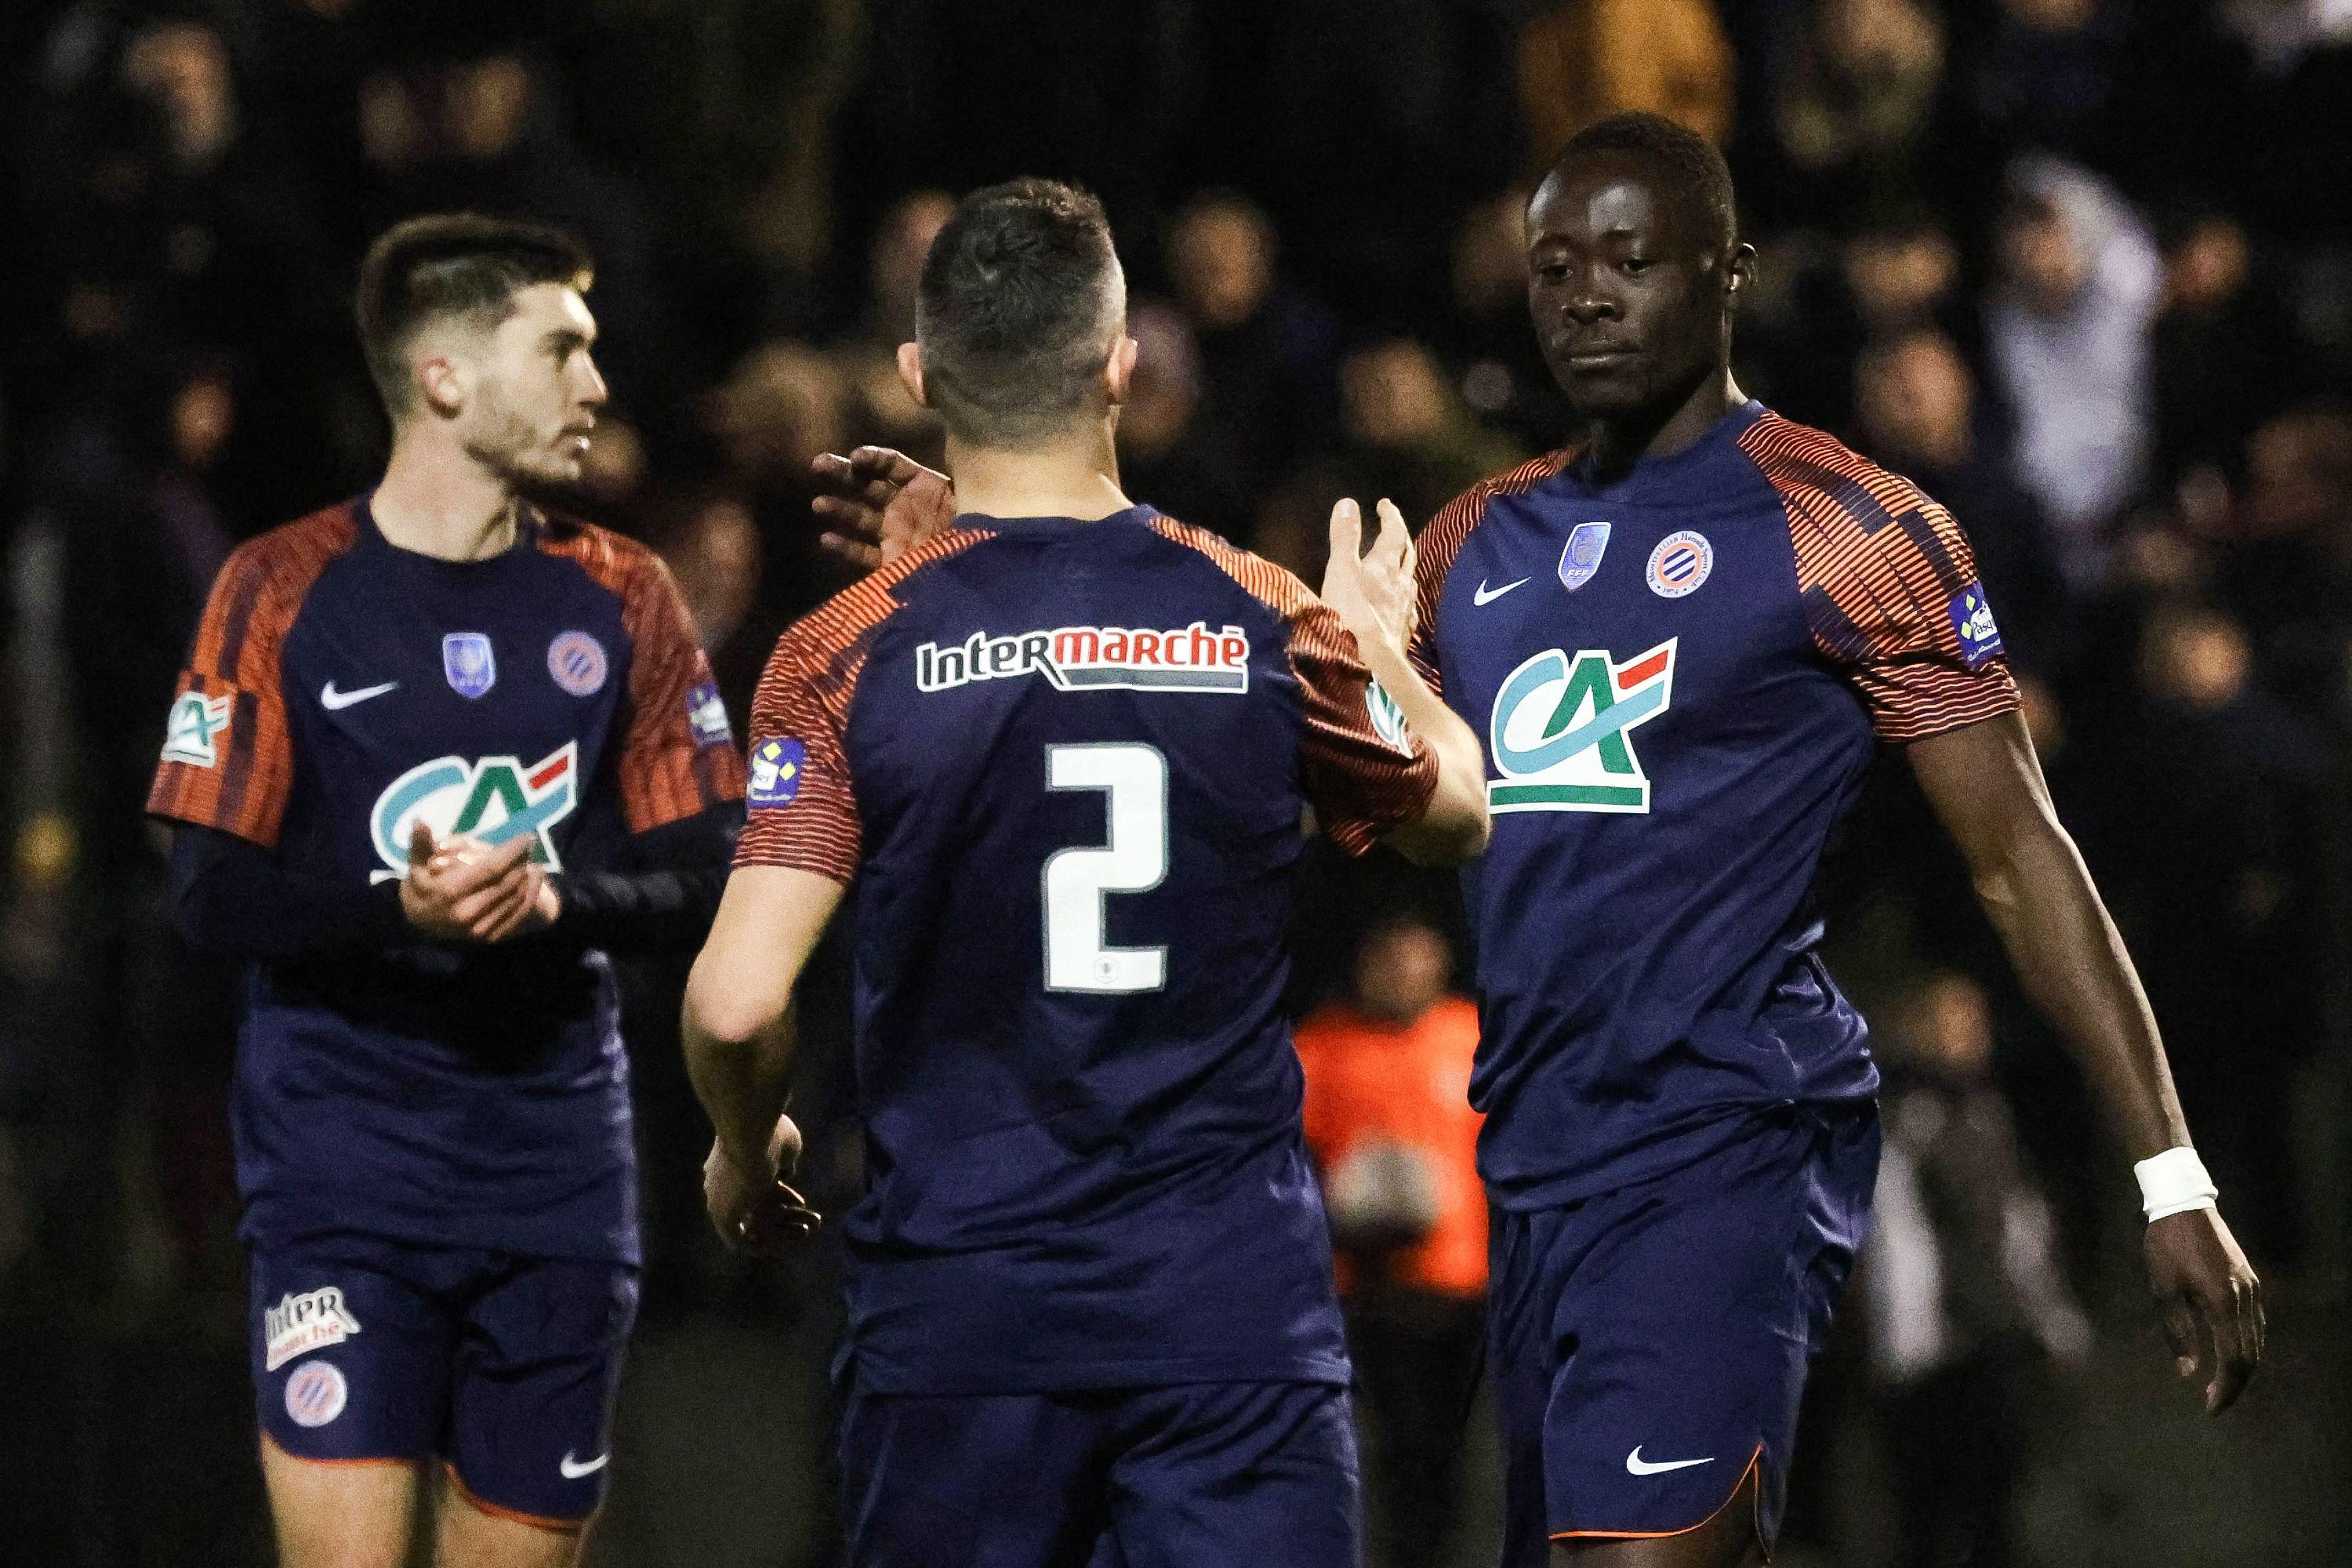 Coupe de France: Montpellier last qualified for the round of 16